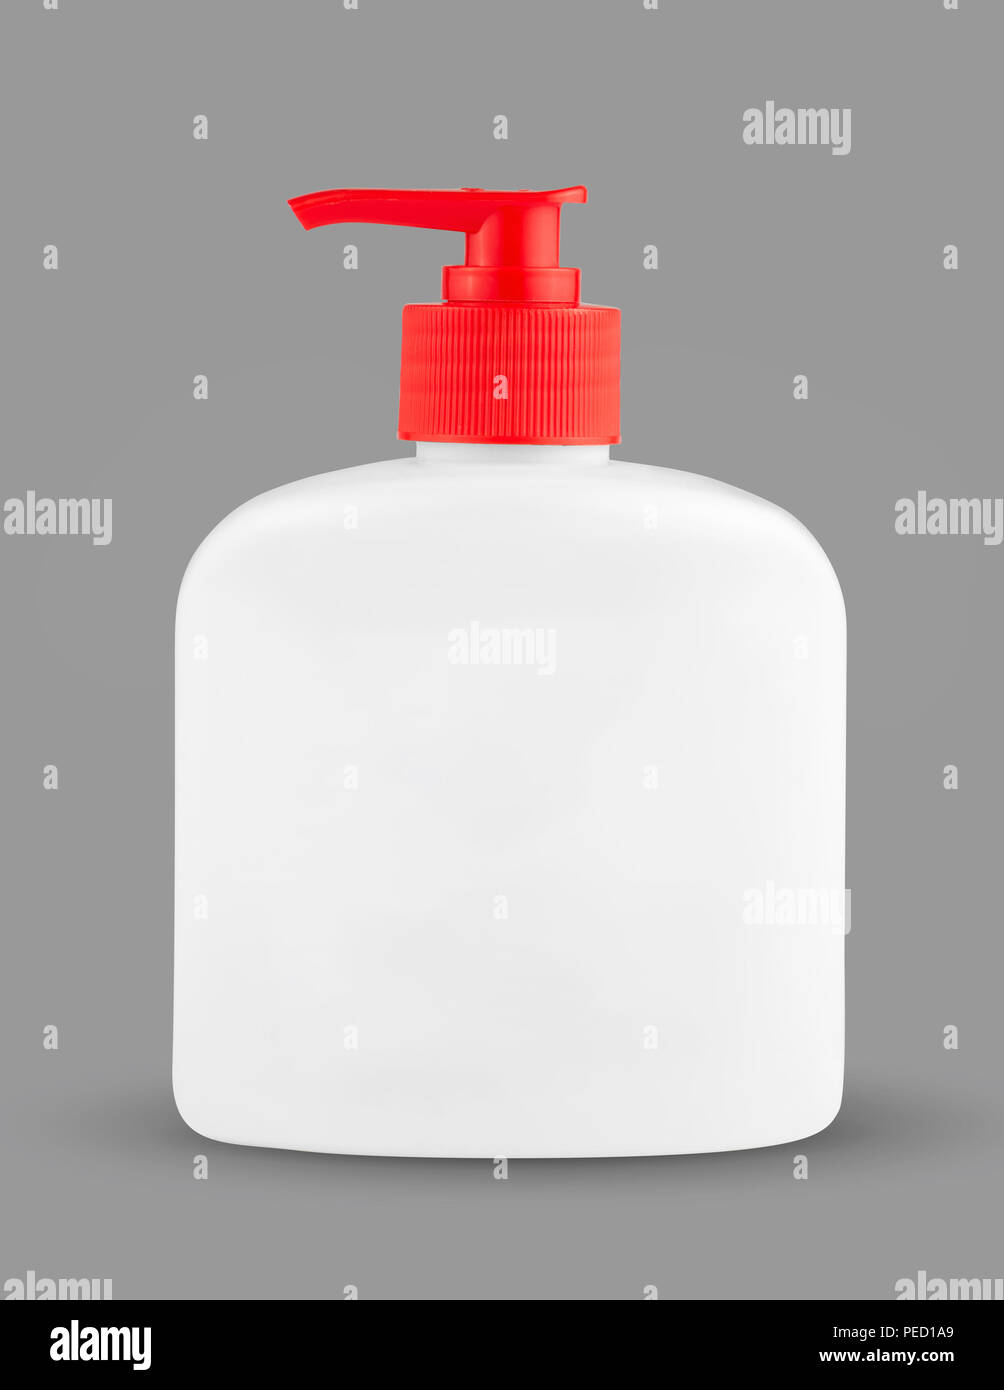 White plastic bottle for liquid laundry detergent, cleaning agent, bleach or fabric softener. Package mockup. Stock Photo